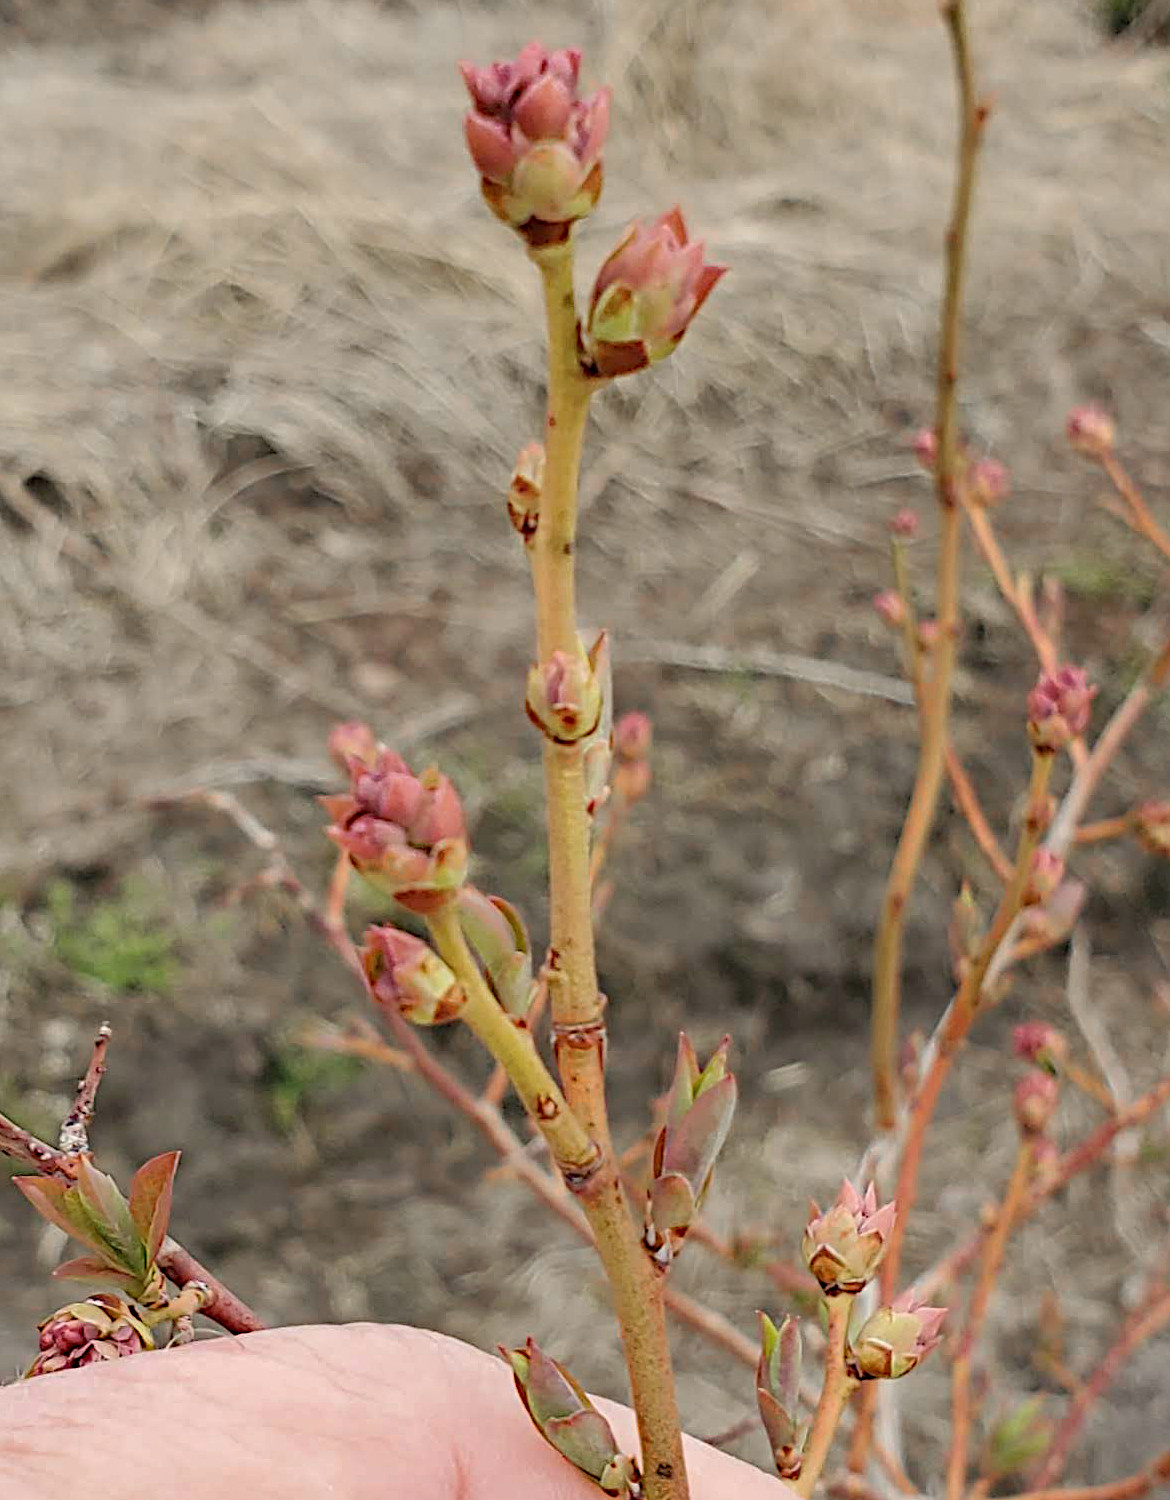 Blueberries at tight cluster stage.